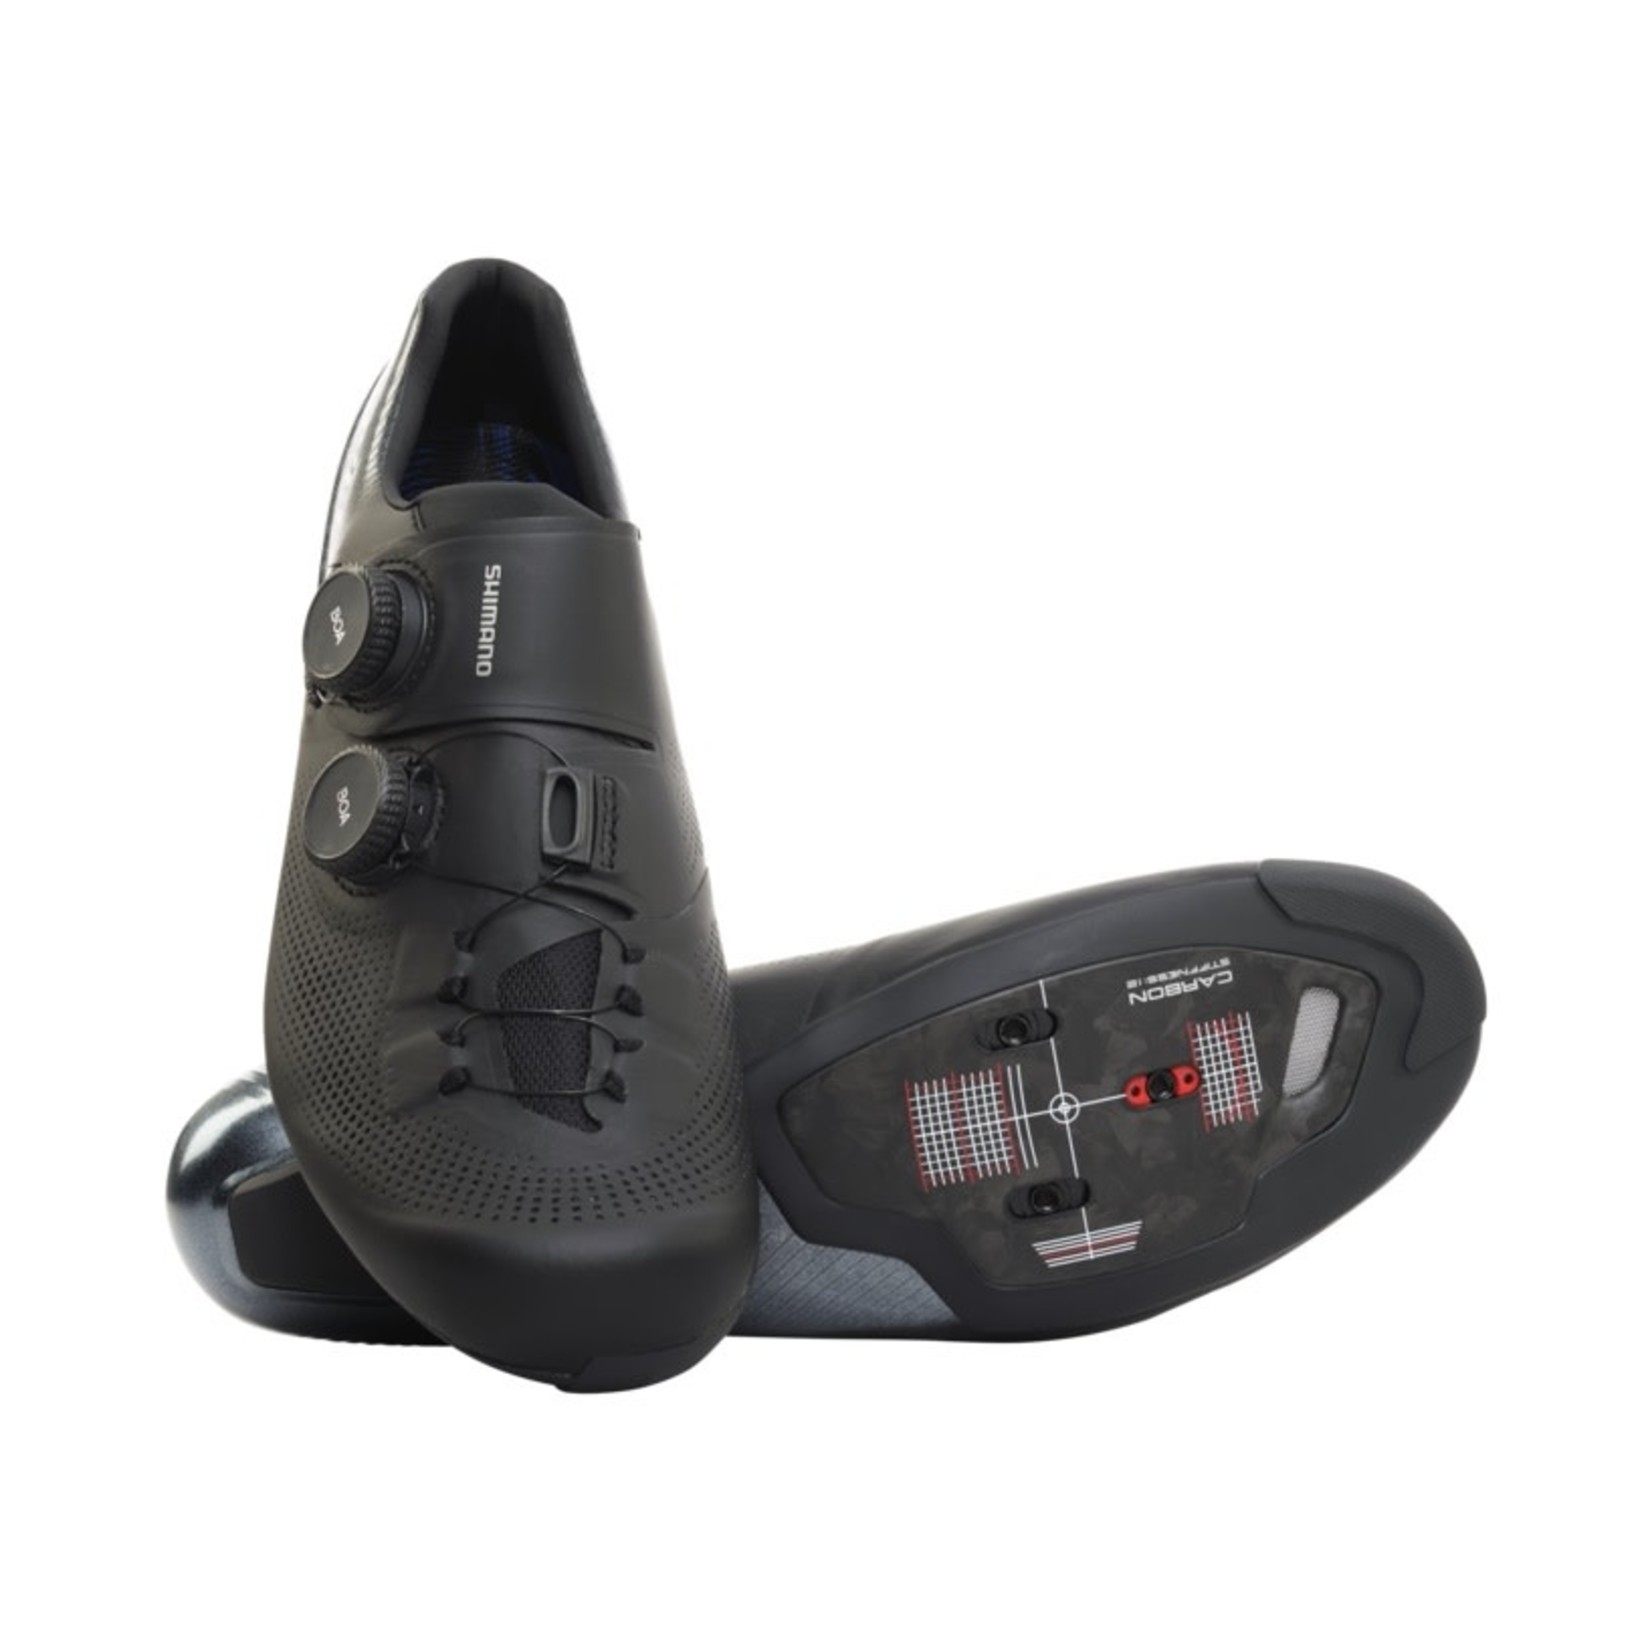 Shimano SH-RC903 S-Phyre Road Cycling Shoe 2023 - Rebec and Kroes